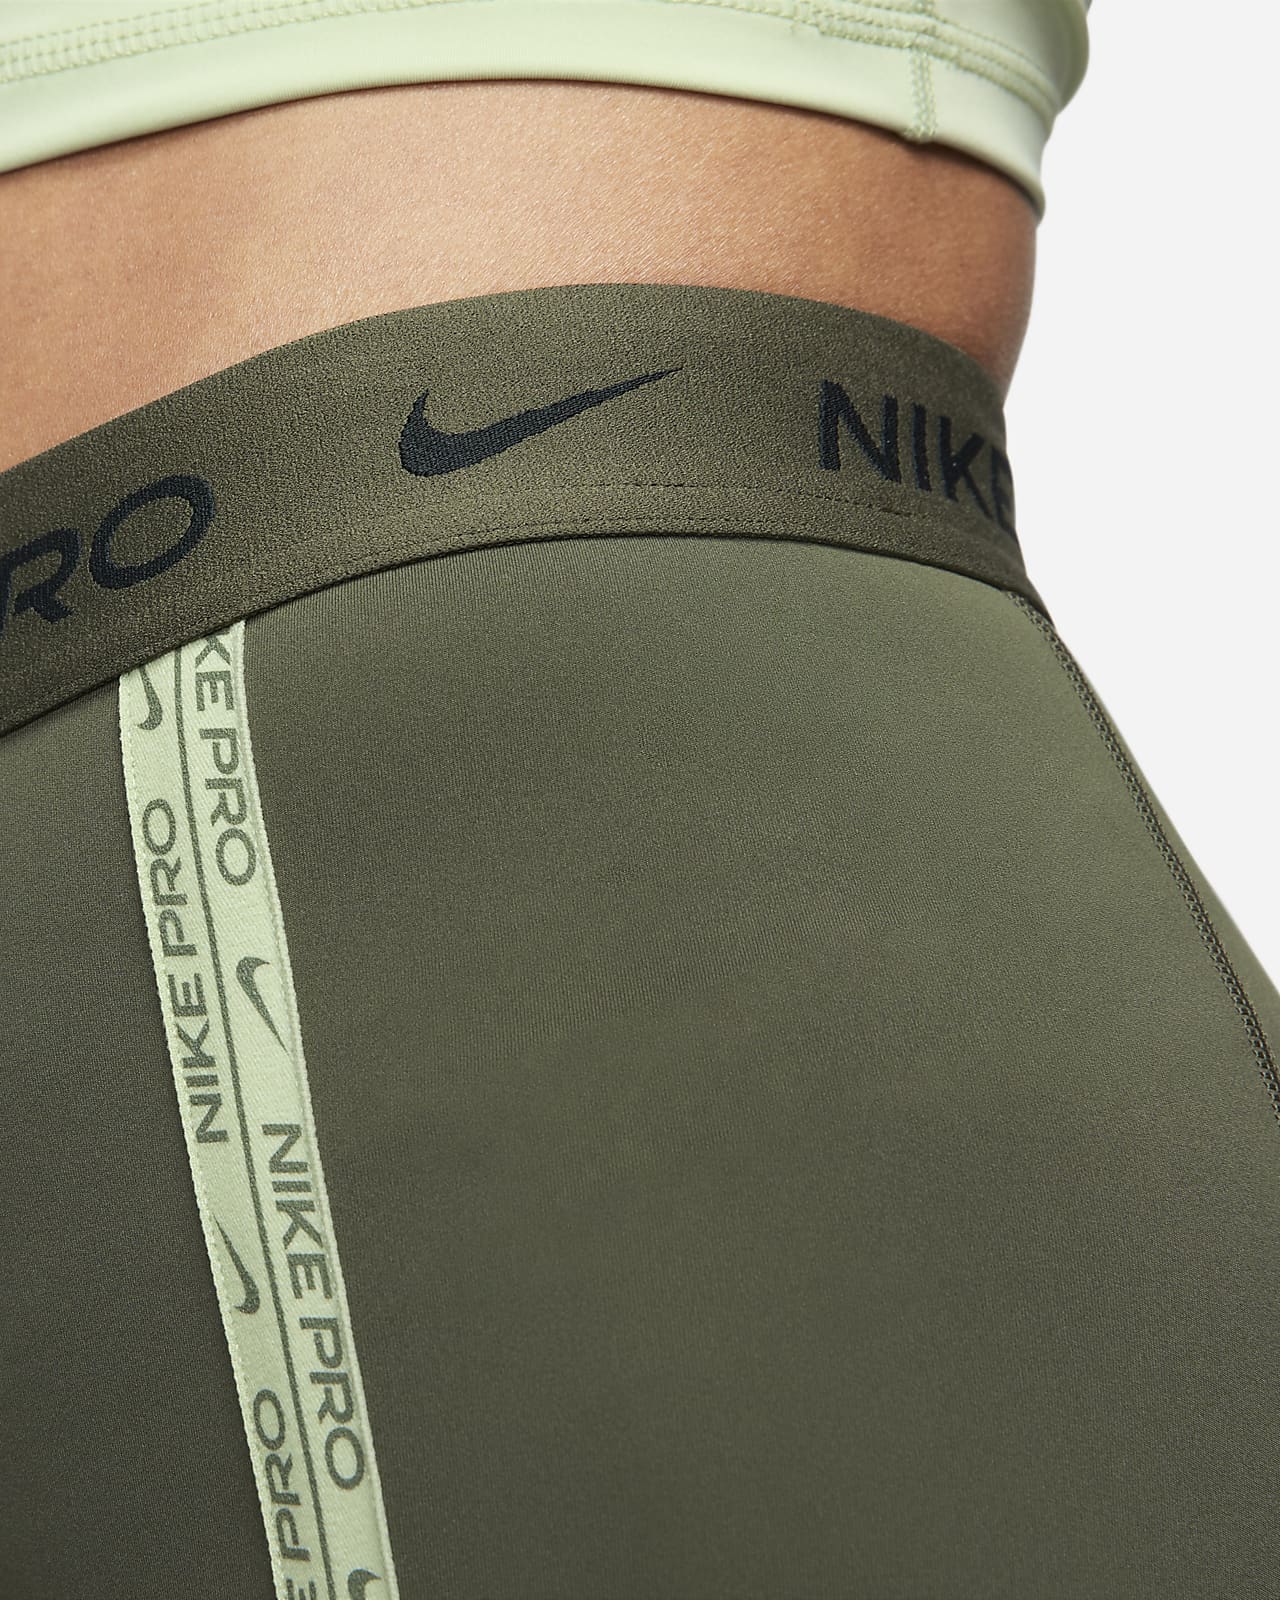 Nike Pro 3 Collection Shorts for Women - Up to 50% off